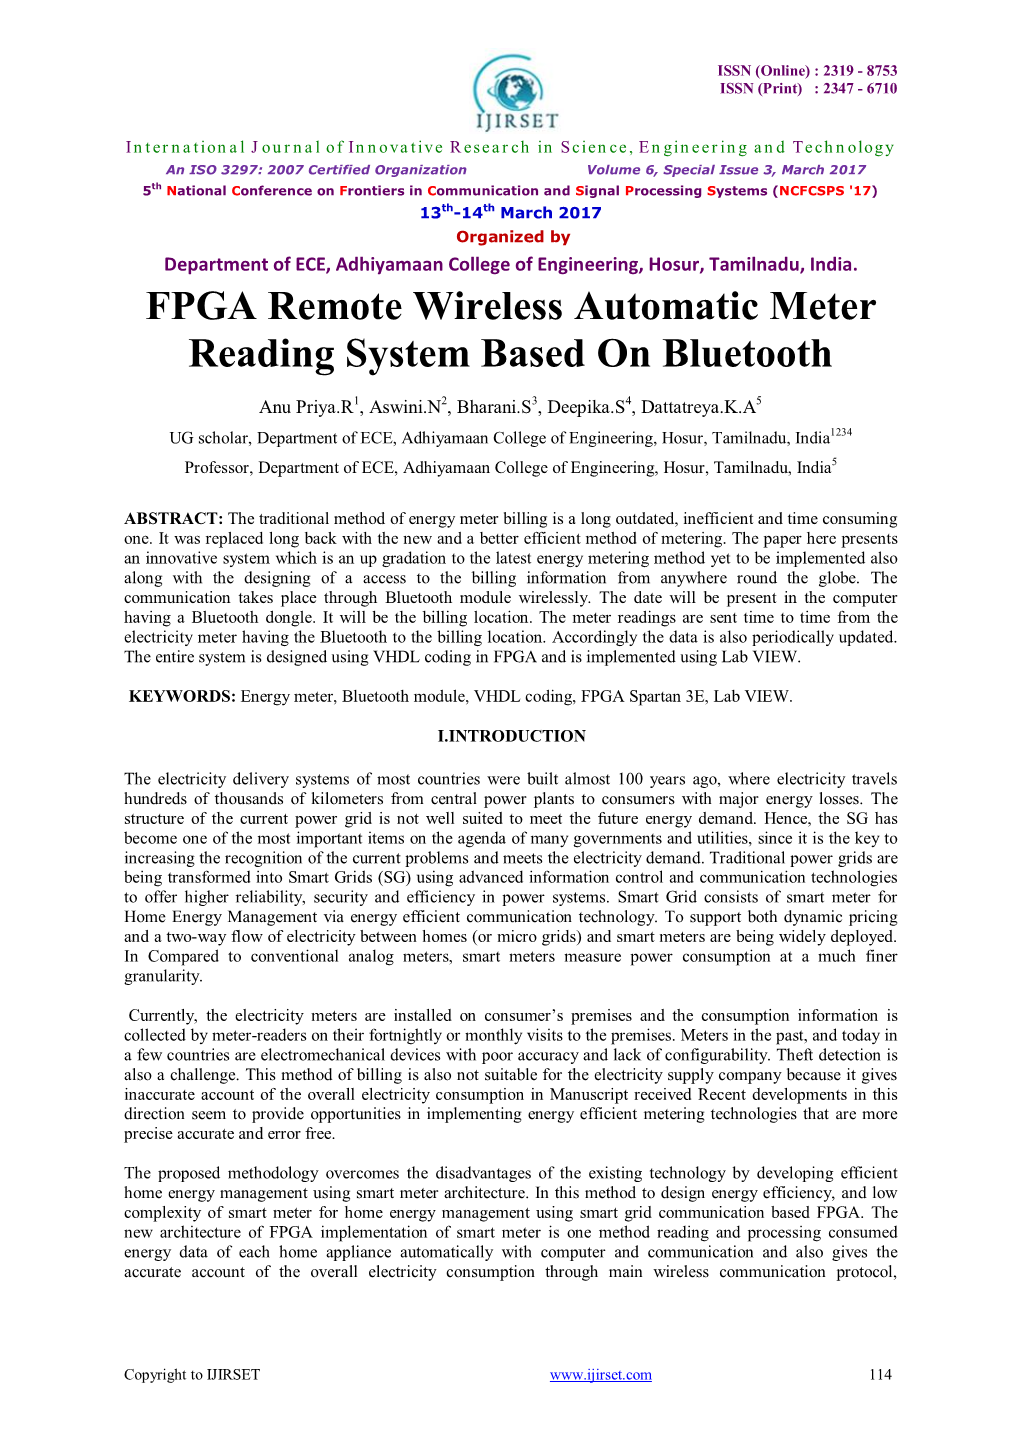 FPGA Remote Wireless Automatic Meter Reading System Based on Bluetooth